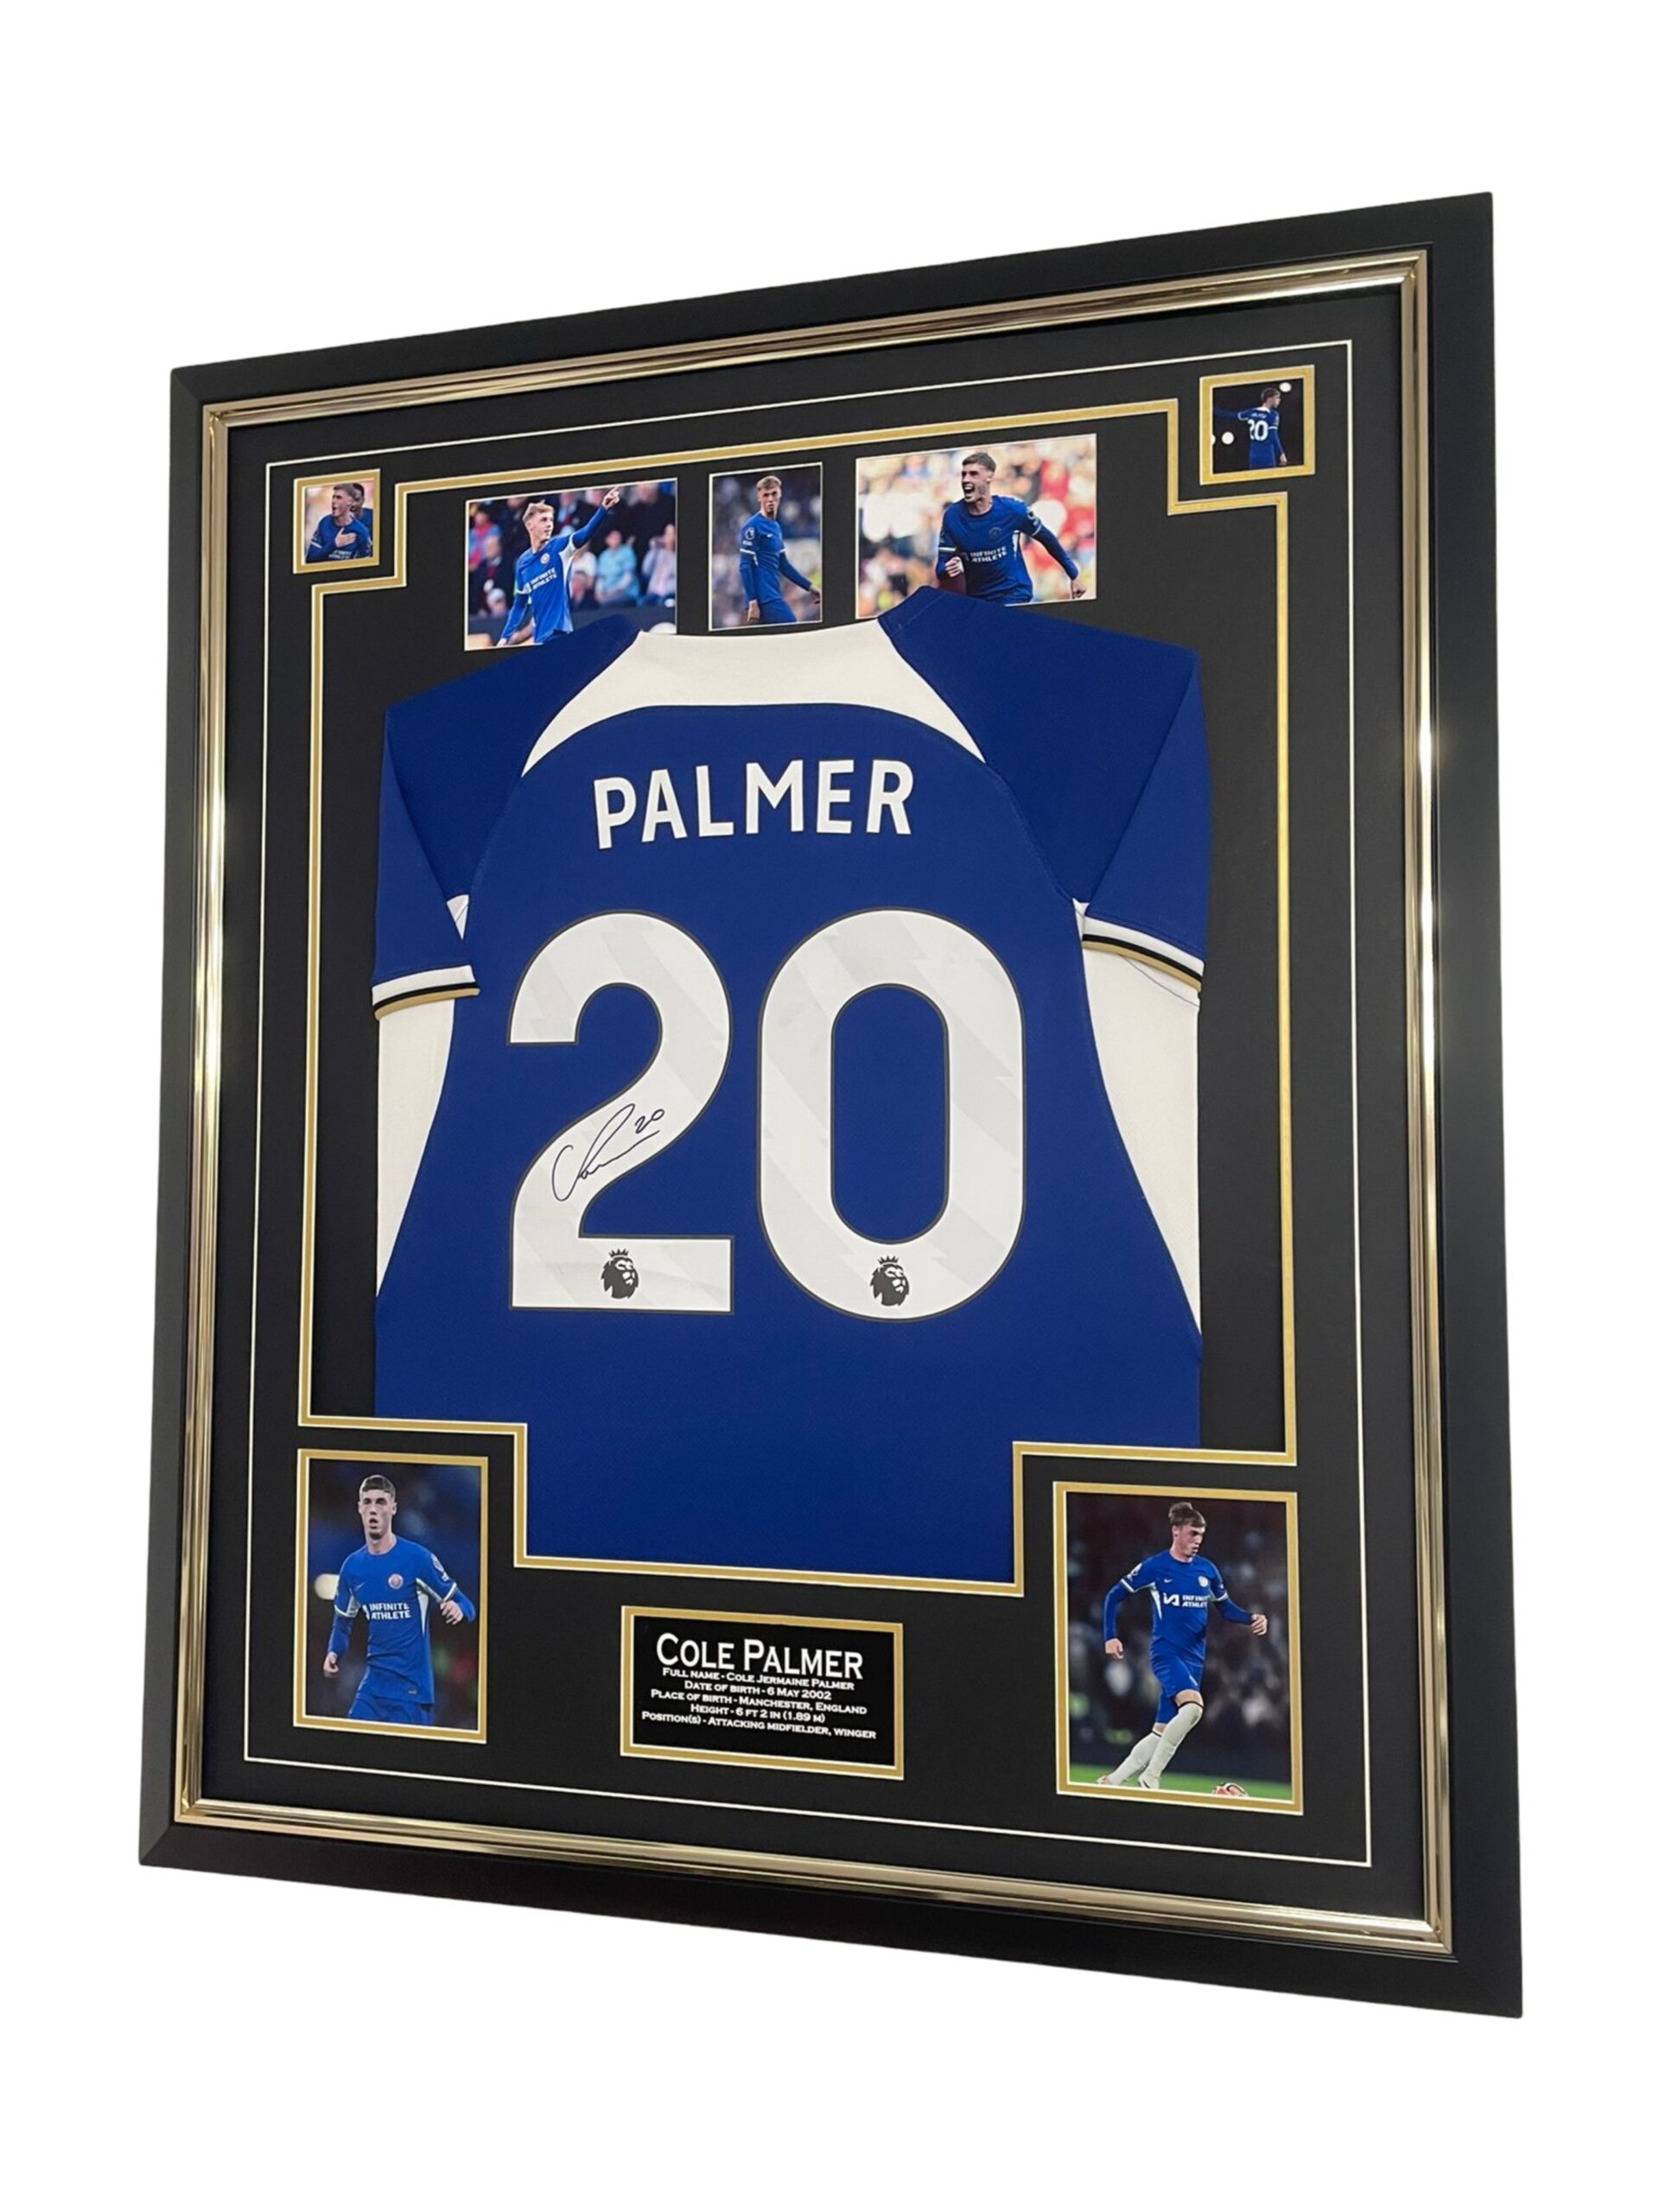 chelsea signed carl palmer jersey